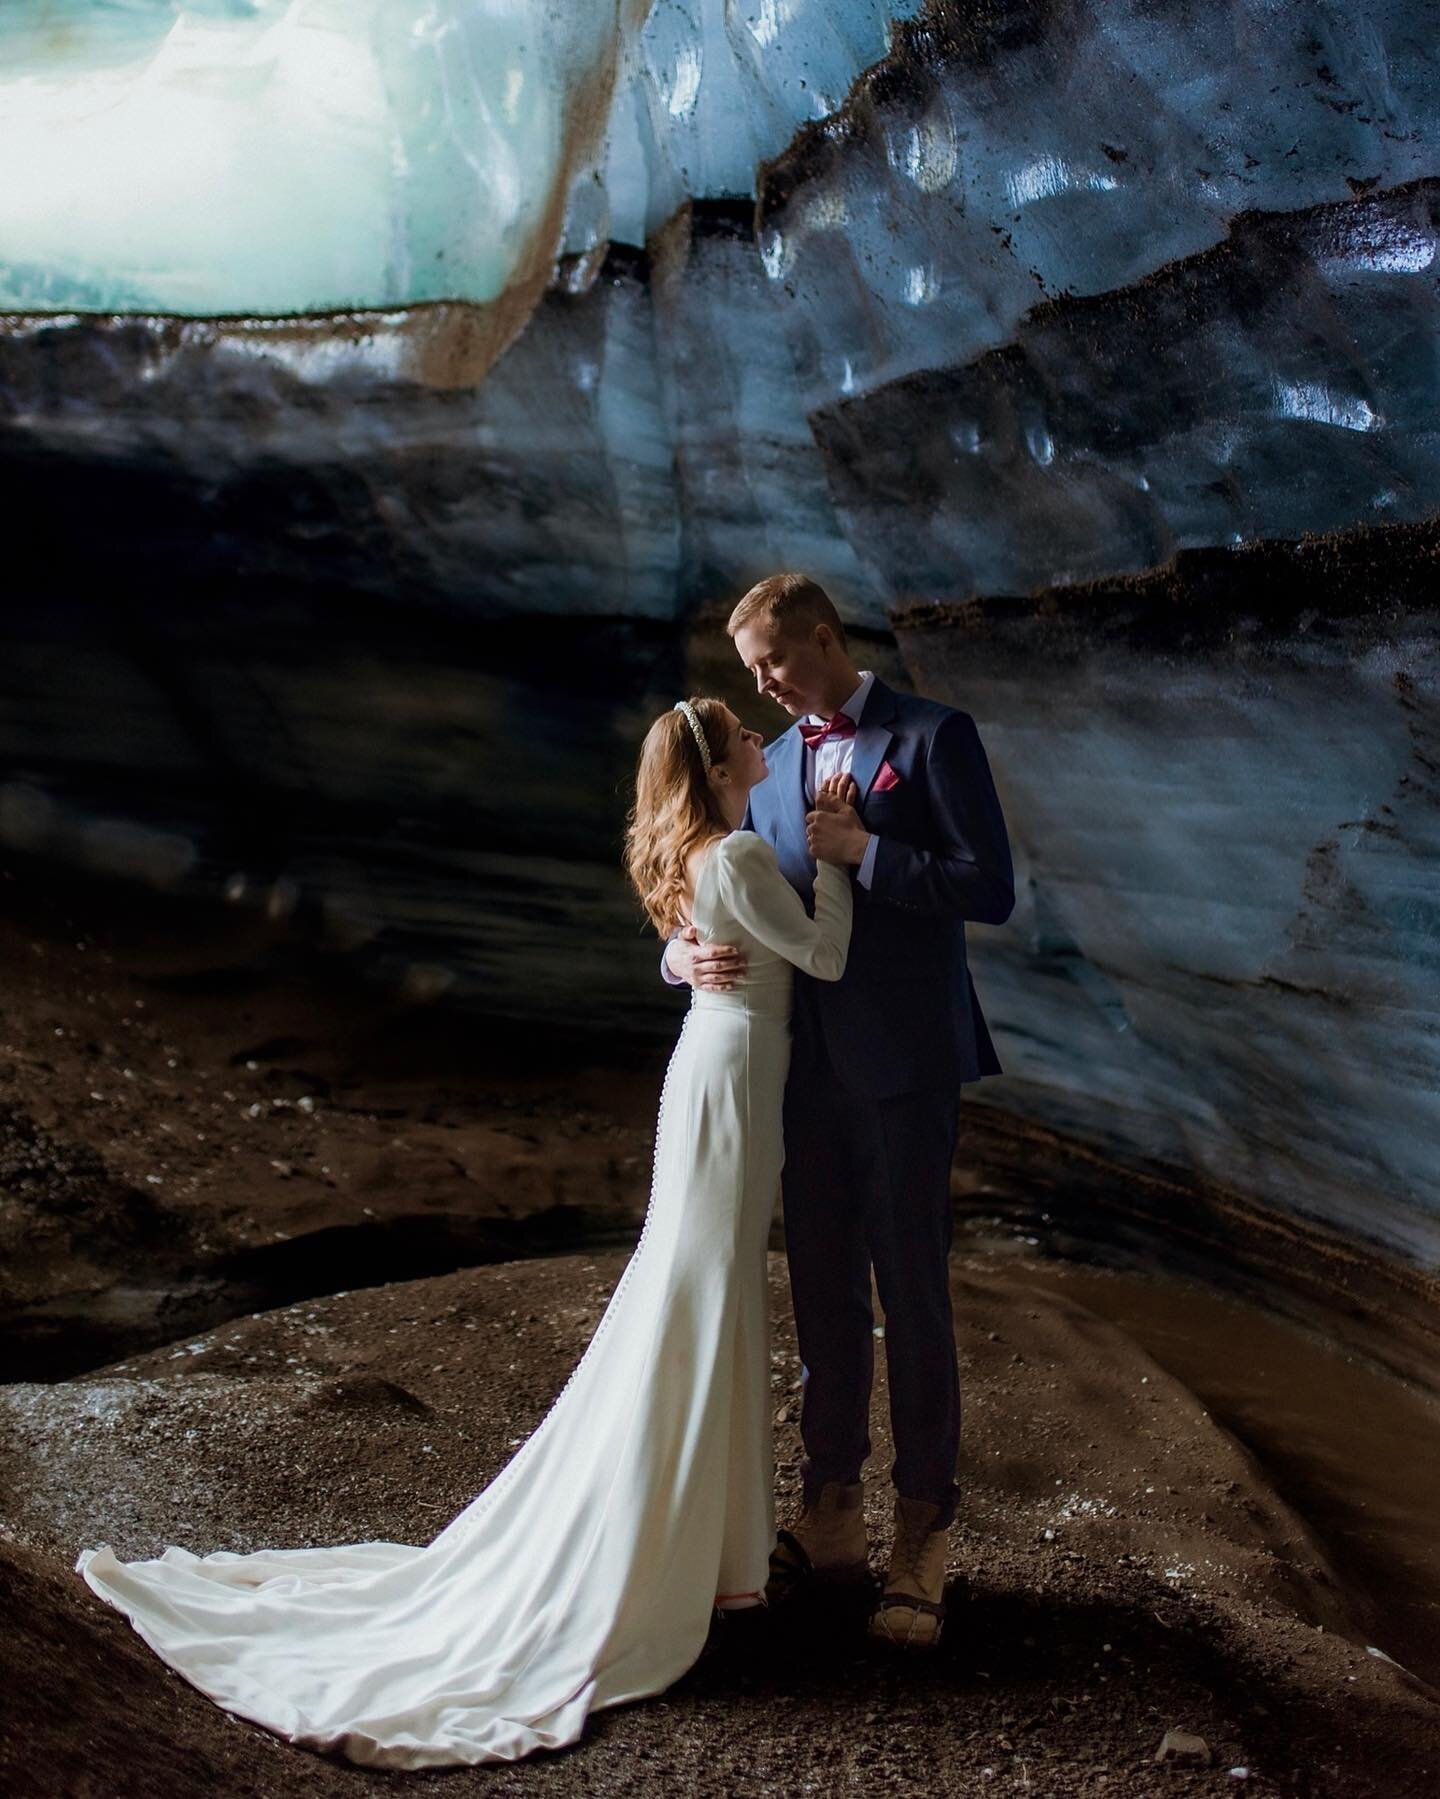 This month I had the privilege to travel to Iceland and photograph Bettina &amp; Baldur&rsquo;s wedding. The day after that we adventured in the land of the volcano Katla, and this was all possible because of @magnusthoroddsen, our incredible tour gu